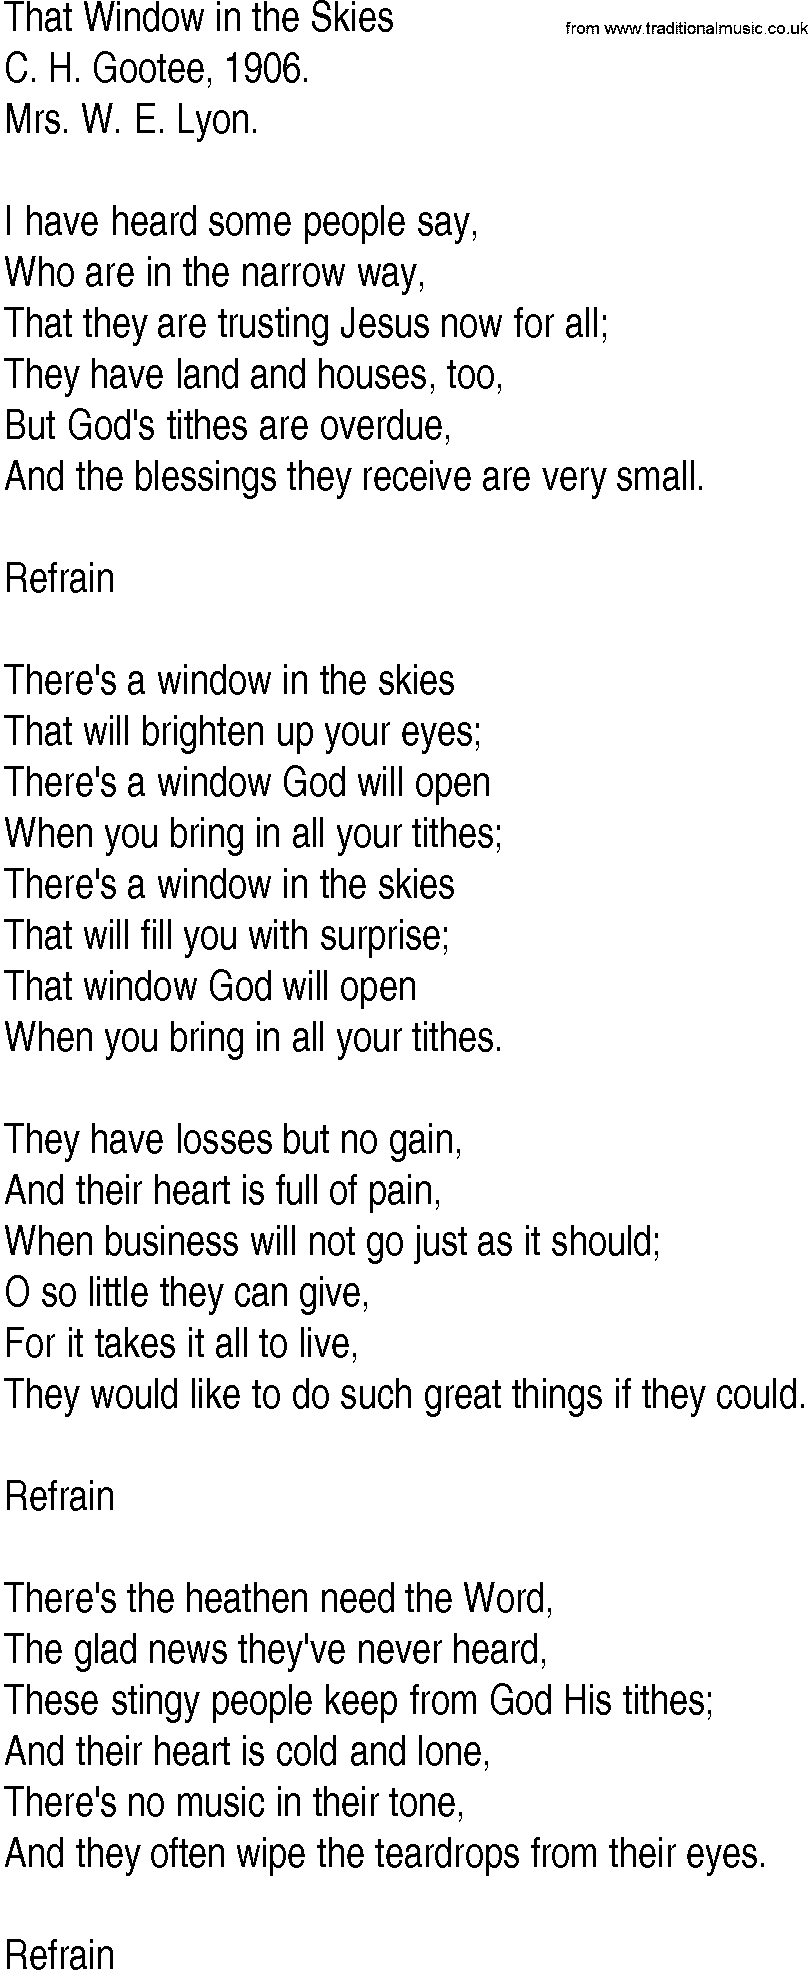 Hymn and Gospel Song: That Window in the Skies by C H Gootee lyrics